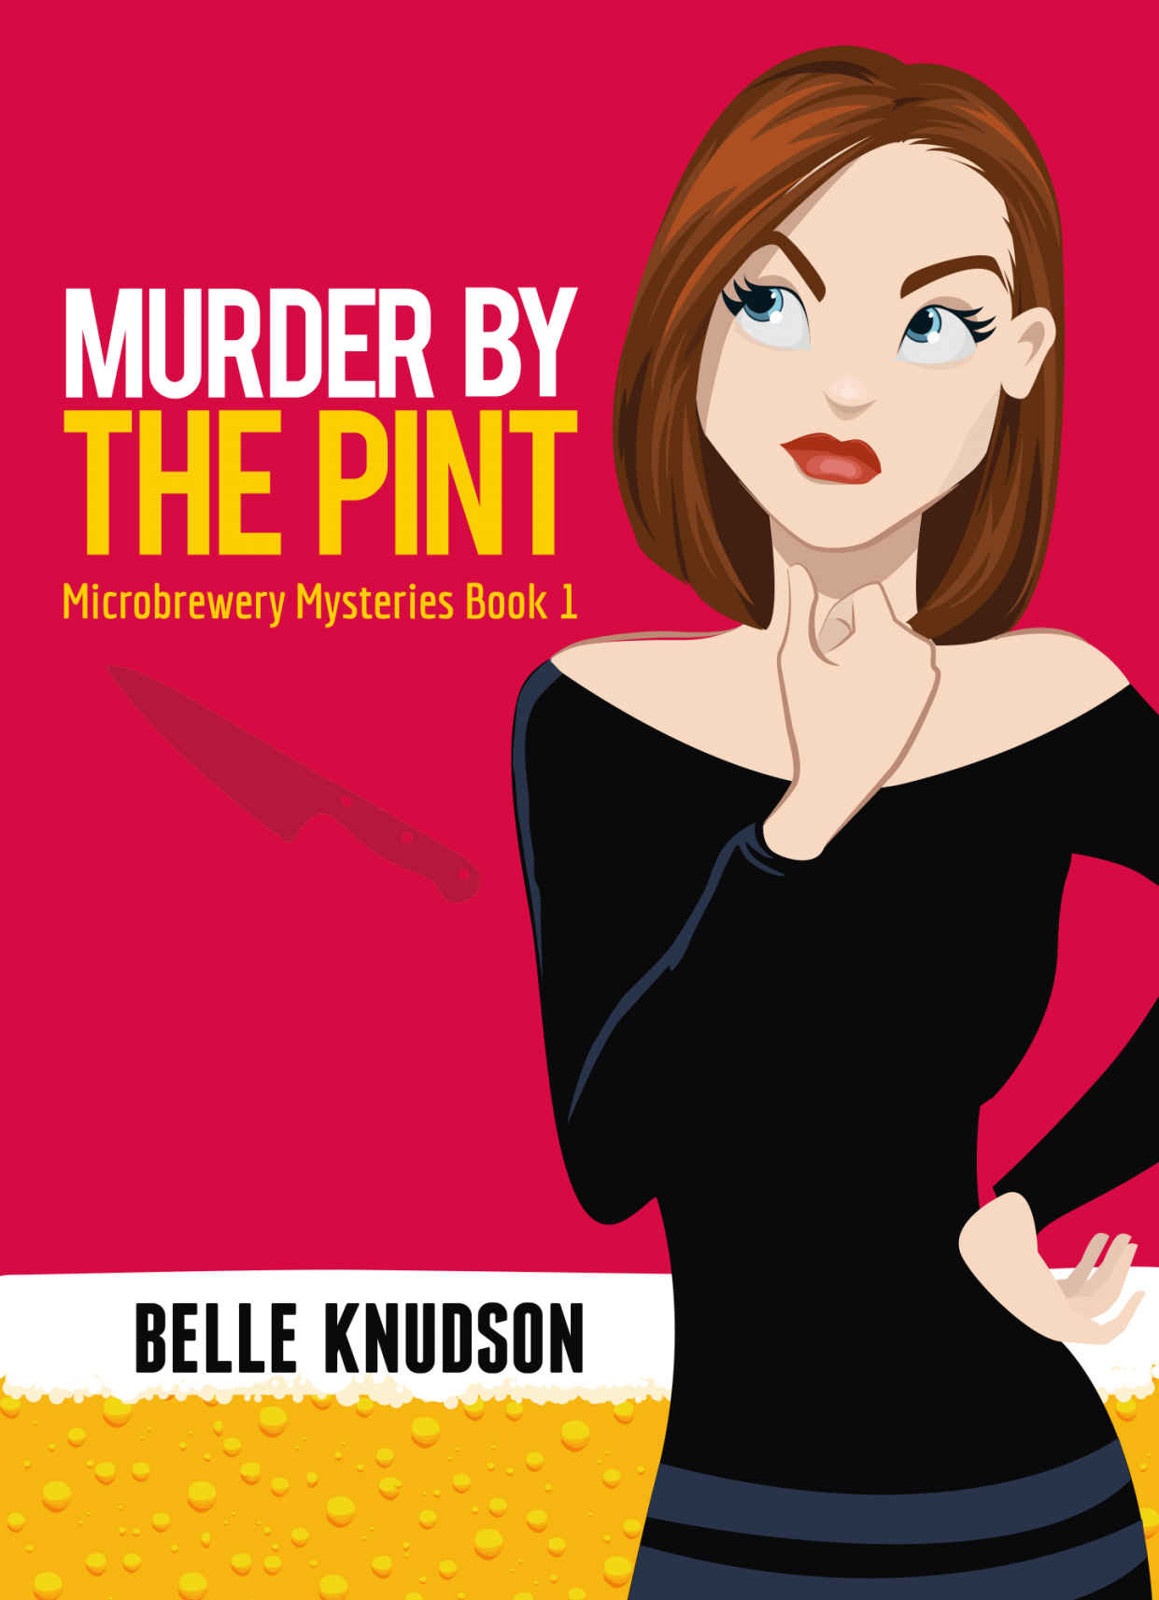 Murder By The Pint (Microbrewery Mysteries Book 1) by Belle Knudson